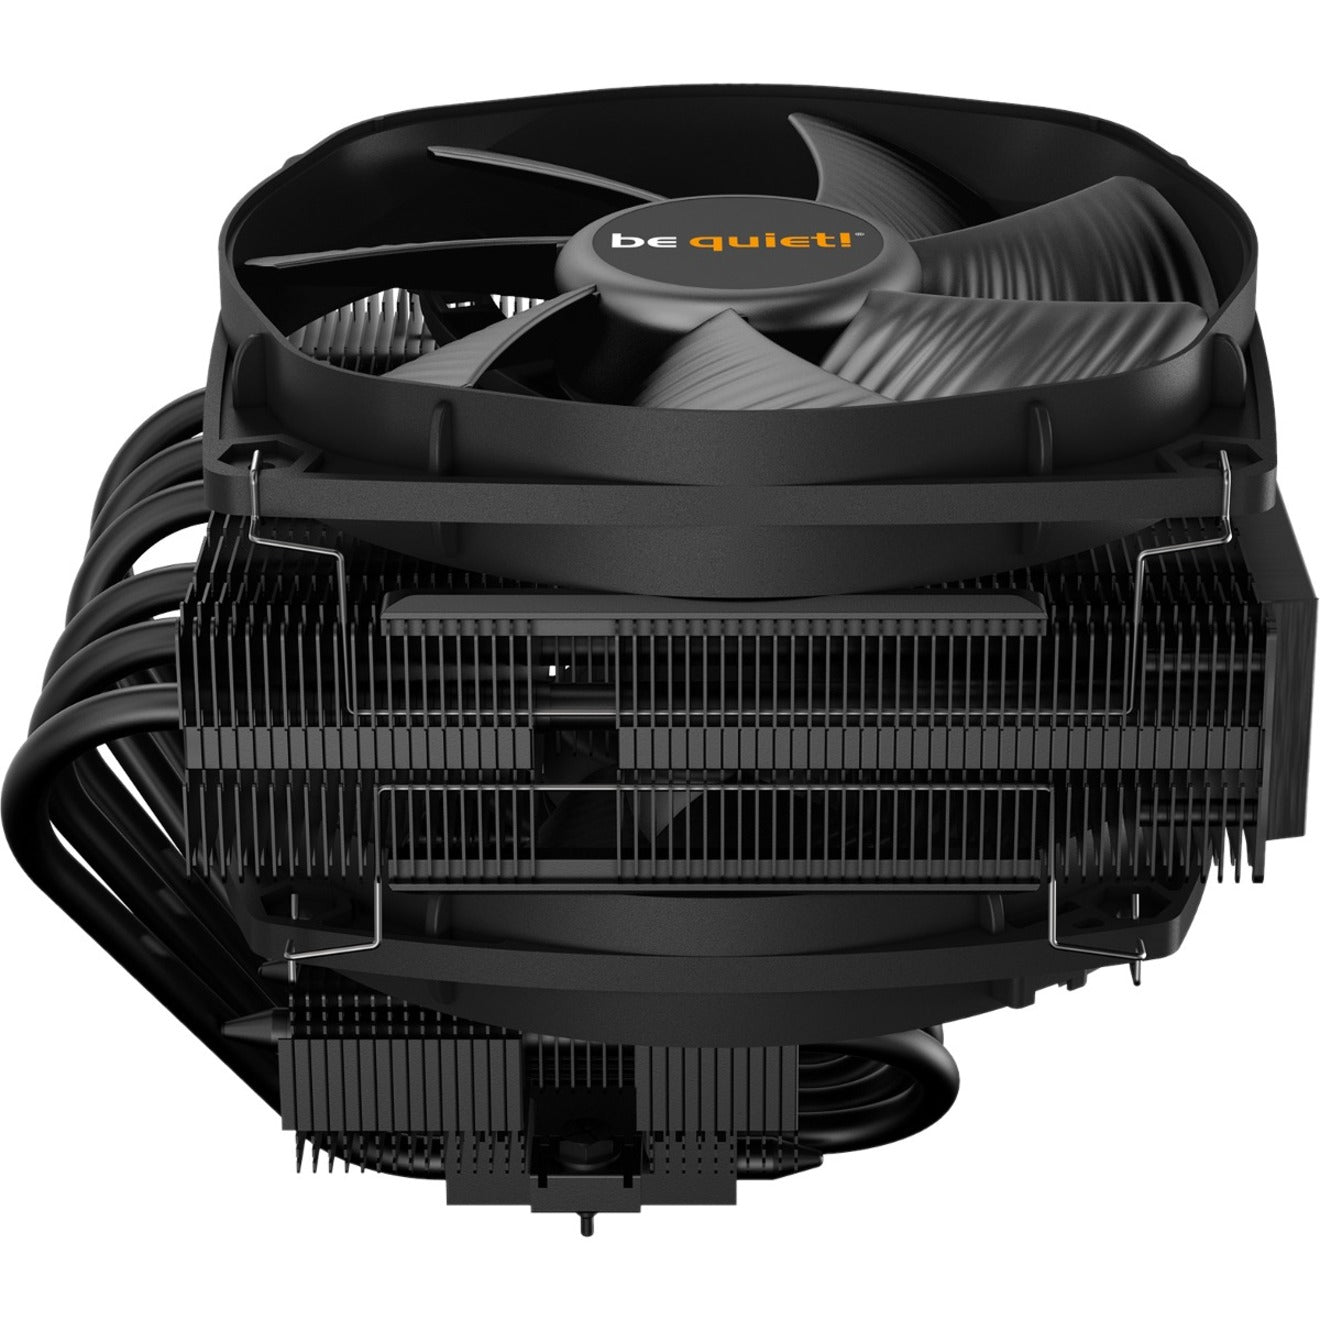 be quiet! BK031 Dark Rock TF 2 Cooling Fan/Heatsink, High Performance Air Cooler for Graphics Card, Gaming Console, Processor, PC, Case